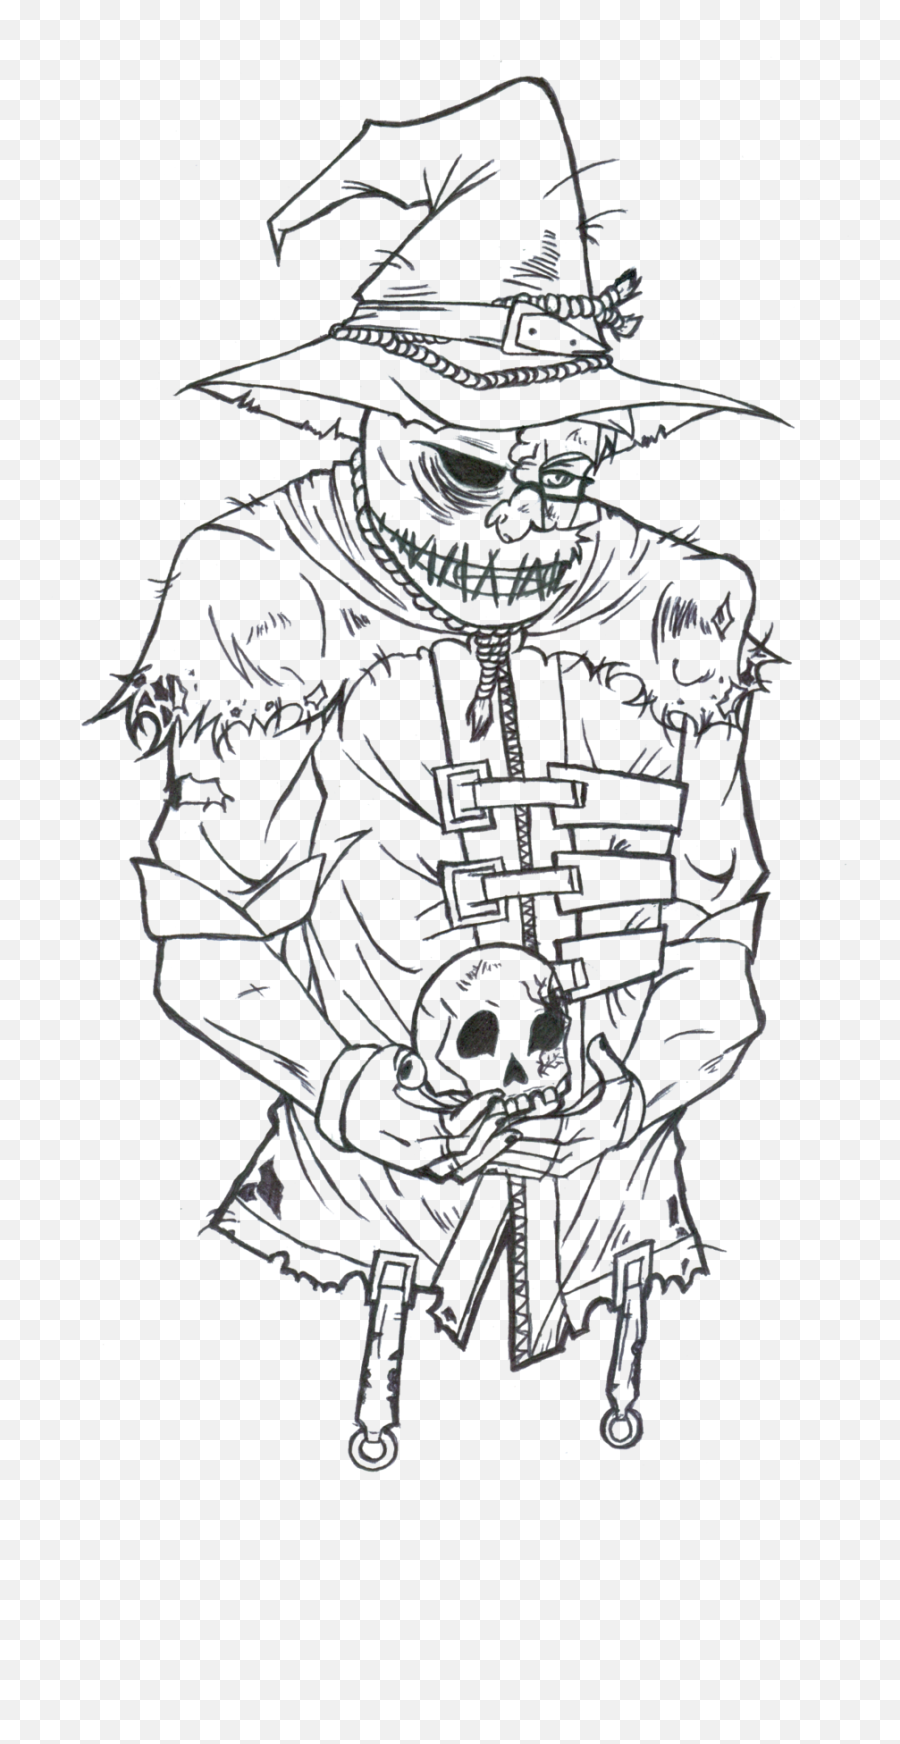 Download Fuc - Dc Scarecrow Coloring Pages Full Size Png Emoji,Coloring Pages Png